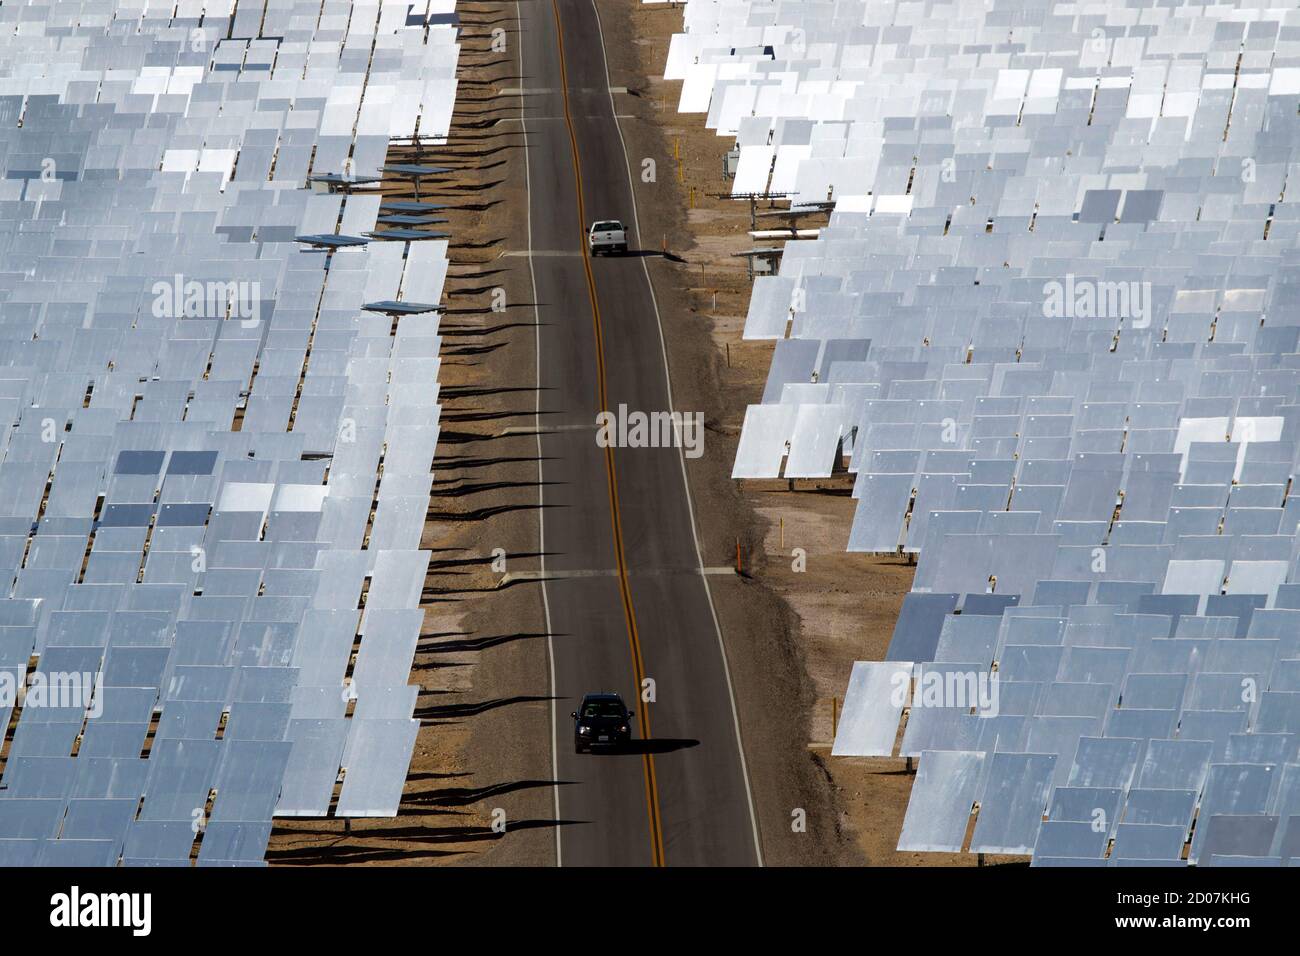 Vehicles drive through field of heliostats (mirrors that track the sun and reflect the sunlight onto a central receiving point) at the Ivanpah Solar Electric Generating System in the Mojave Desert near the California-Nevada border February 13, 2014. The project, a partnership of NRG, BrightSource, Google and Bechtel, is the world's largest solar thermal facility and uses 347,000 sun-facing mirrors to produce 392 Megawatts of electricity, enough energy to power more than 140,000 homes. REUTERS/Steve Marcus (UNITED STATES - Tags: ENERGY BUSINESS SCIENCE TECHNOLOGY) Stock Photo